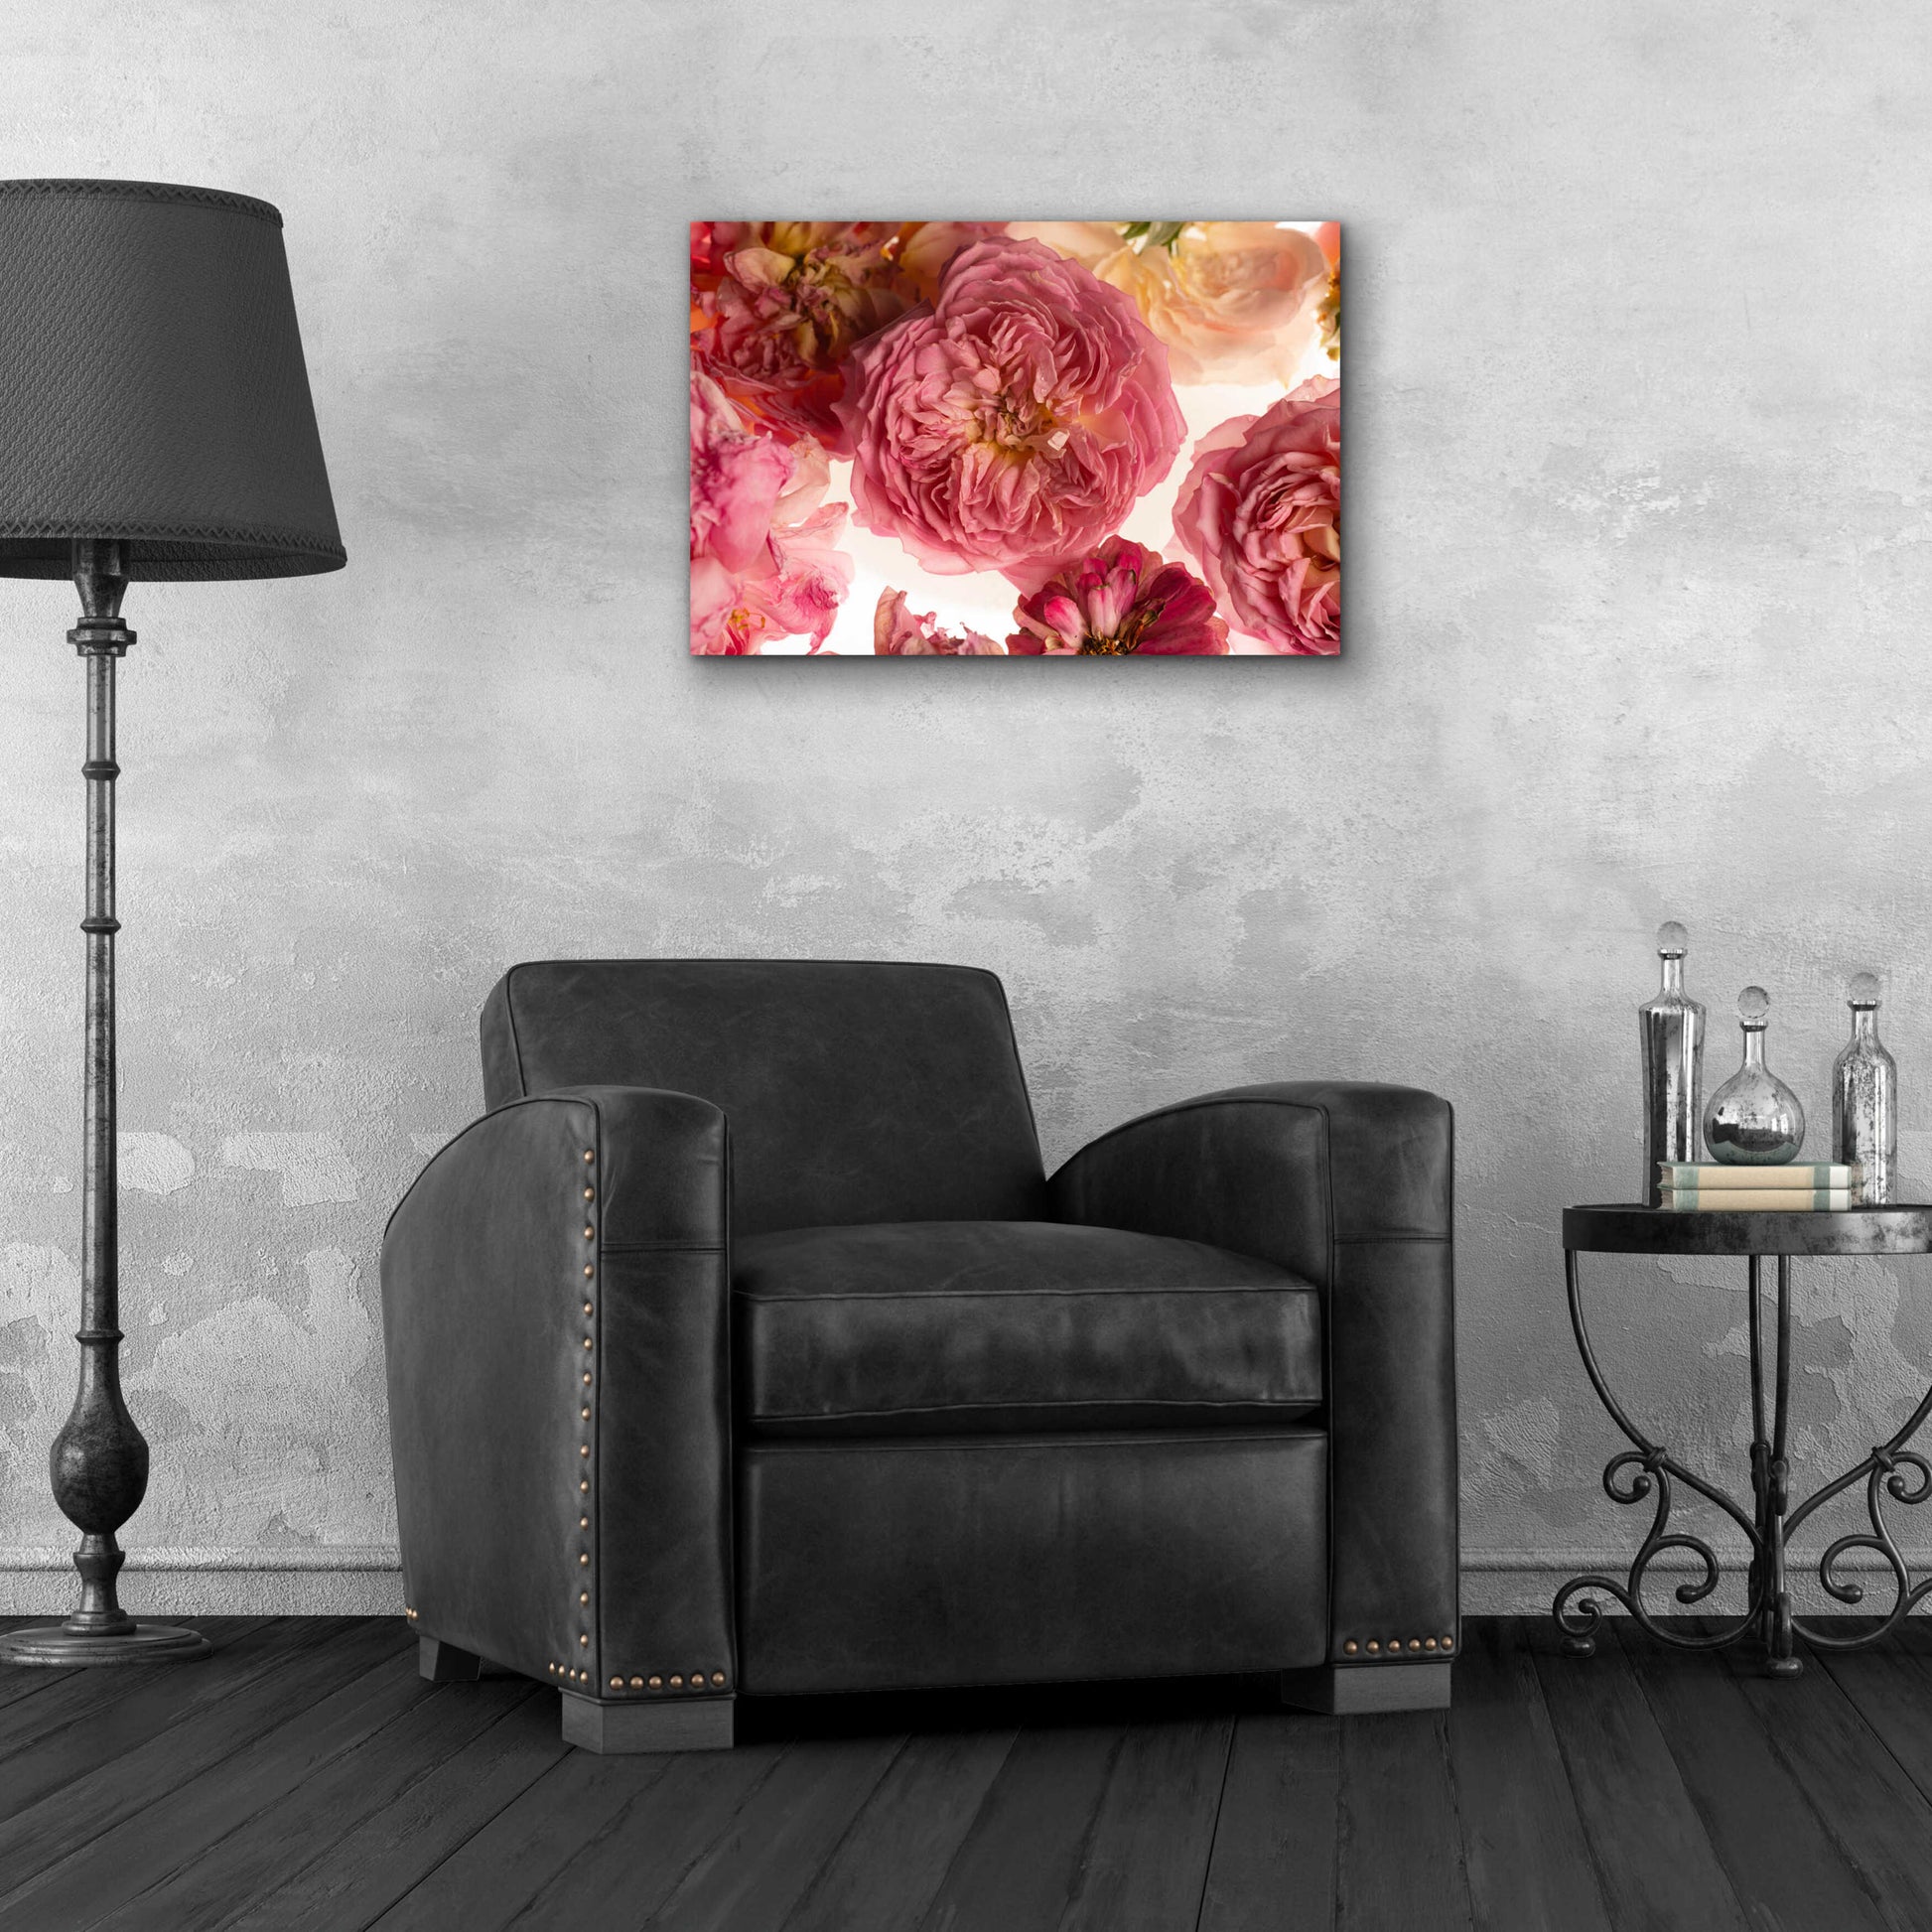 Epic Art 'Rose on White' by Leah McLean, Acrylic Glass Wall Art,24x16